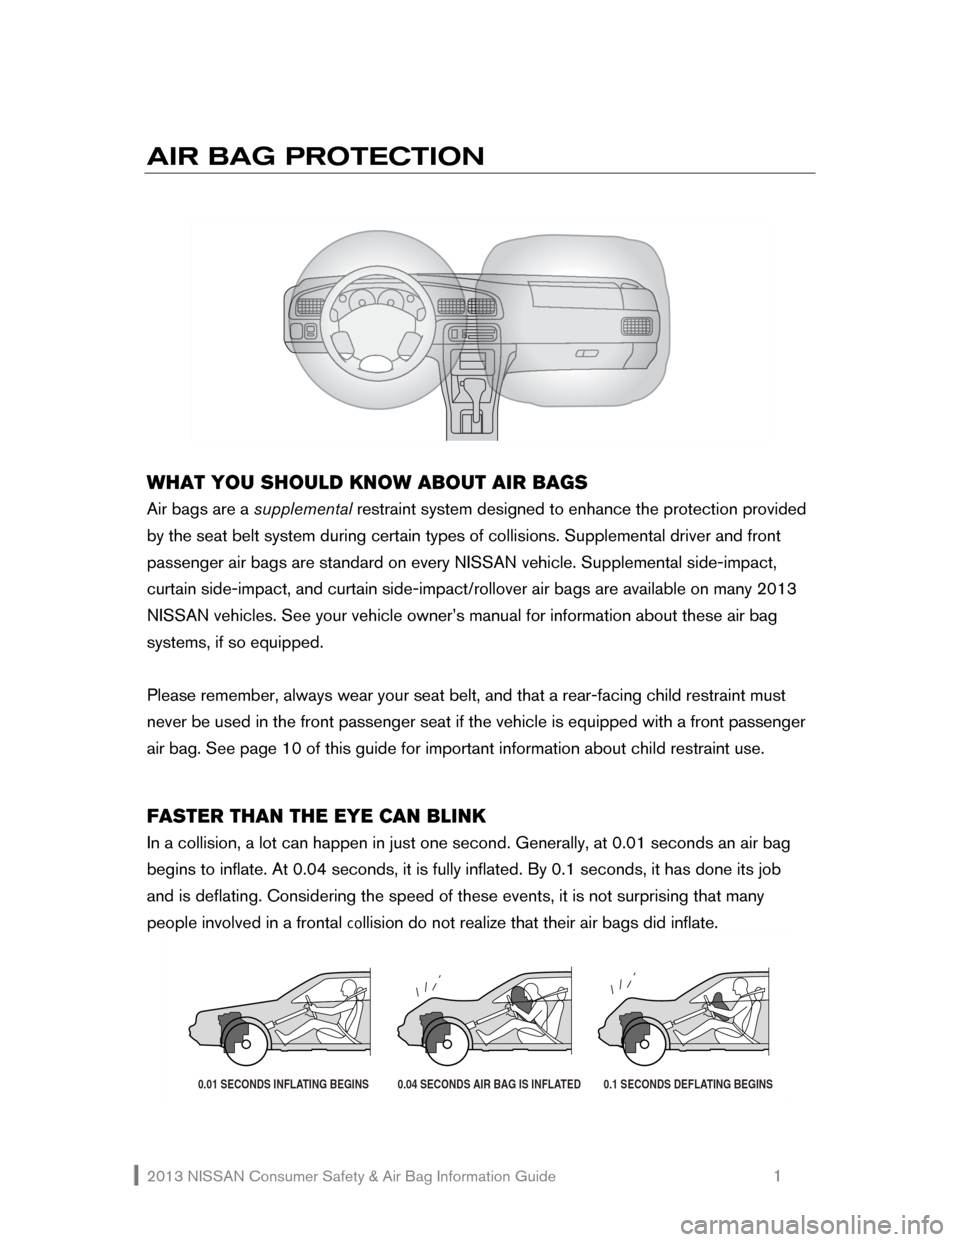 NISSAN 370Z COUPE 2013 Z34 Consumer Safety Air Bag Information Guide 2013 NISSAN Consumer Safety & Air Bag Information Guide                                                   1 
AIR BAG PROTECTION 
    
 
 
WHAT YOU SHOULD KNOW ABOUT AIR BAGS 
Air bags are a supplement